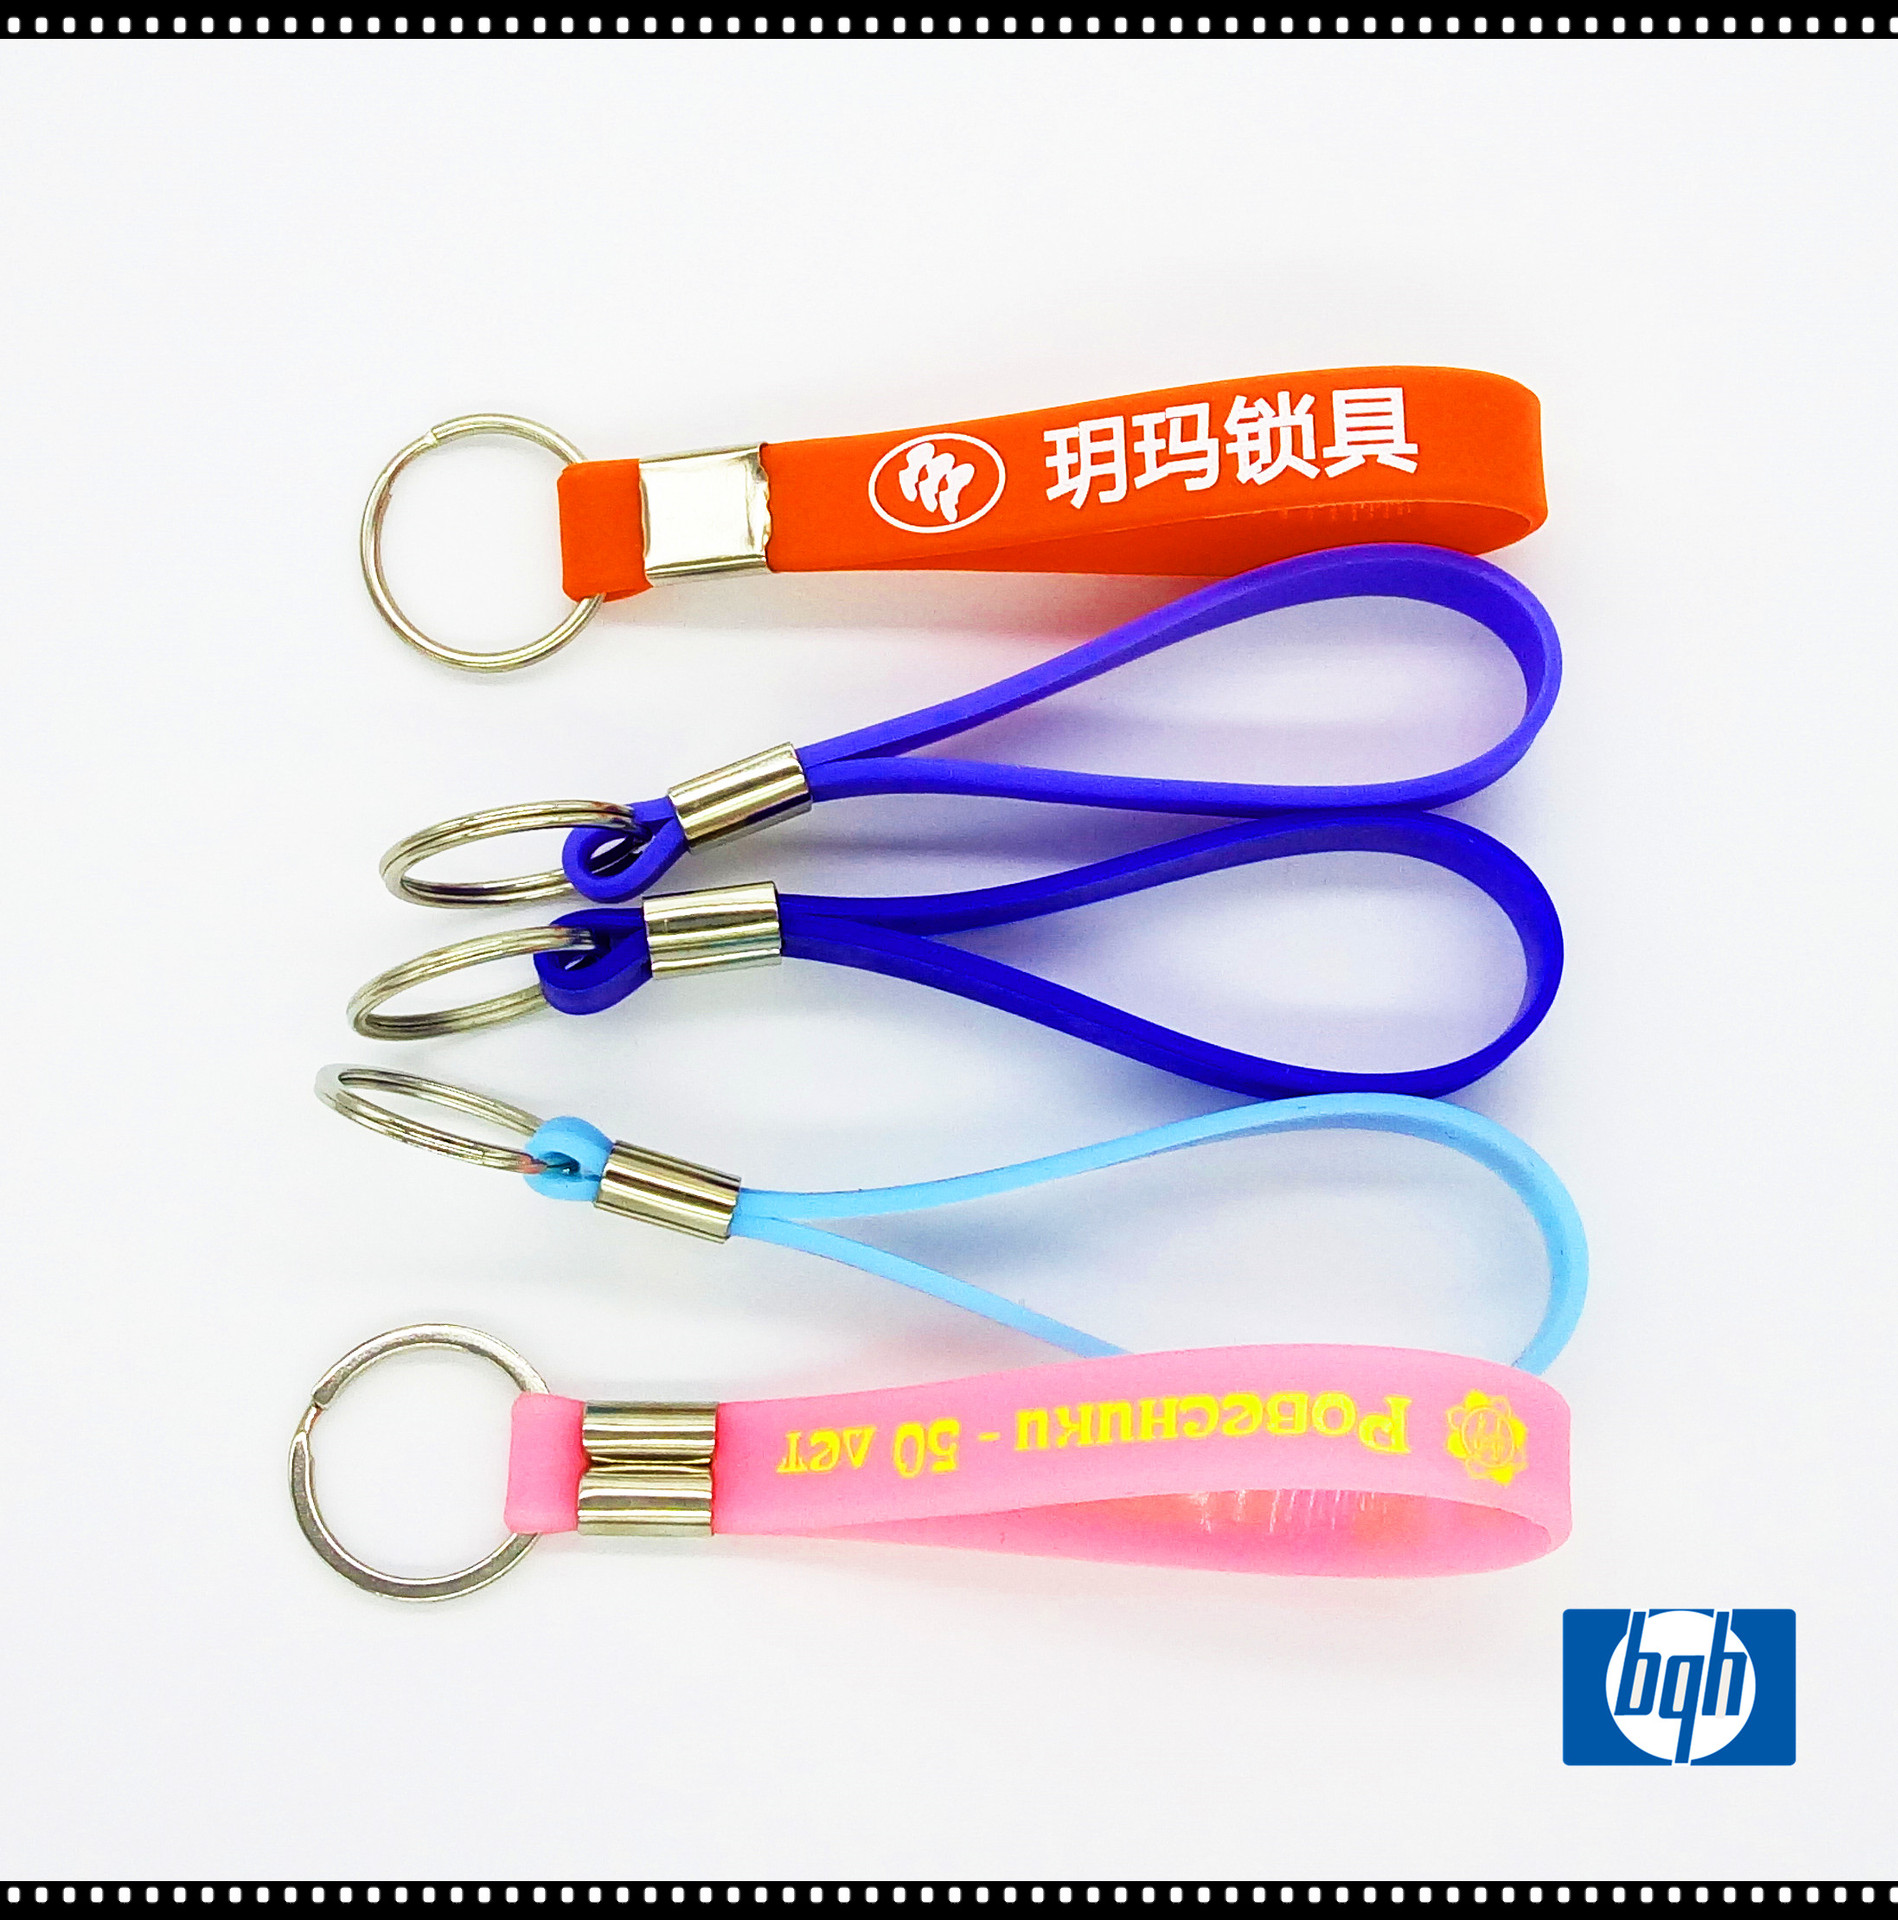 Luminous Silicone Key Chain Printing Lettering Rubber Wrist Band Key Chain Fluorescent Silicone Key Ring Accessories Pendant